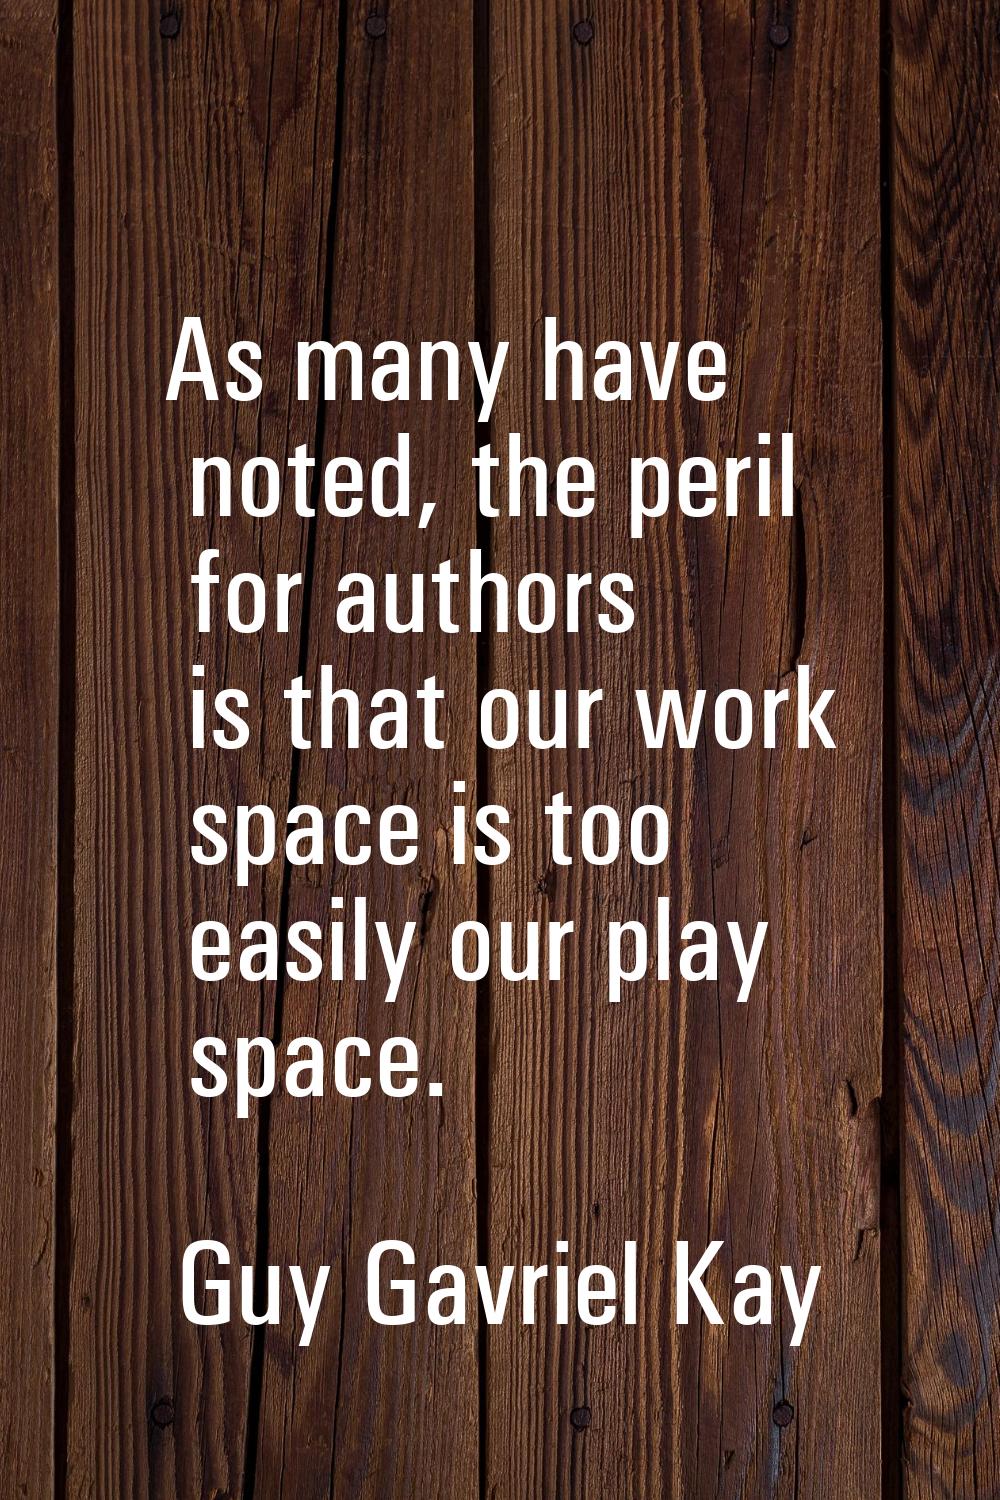 As many have noted, the peril for authors is that our work space is too easily our play space.